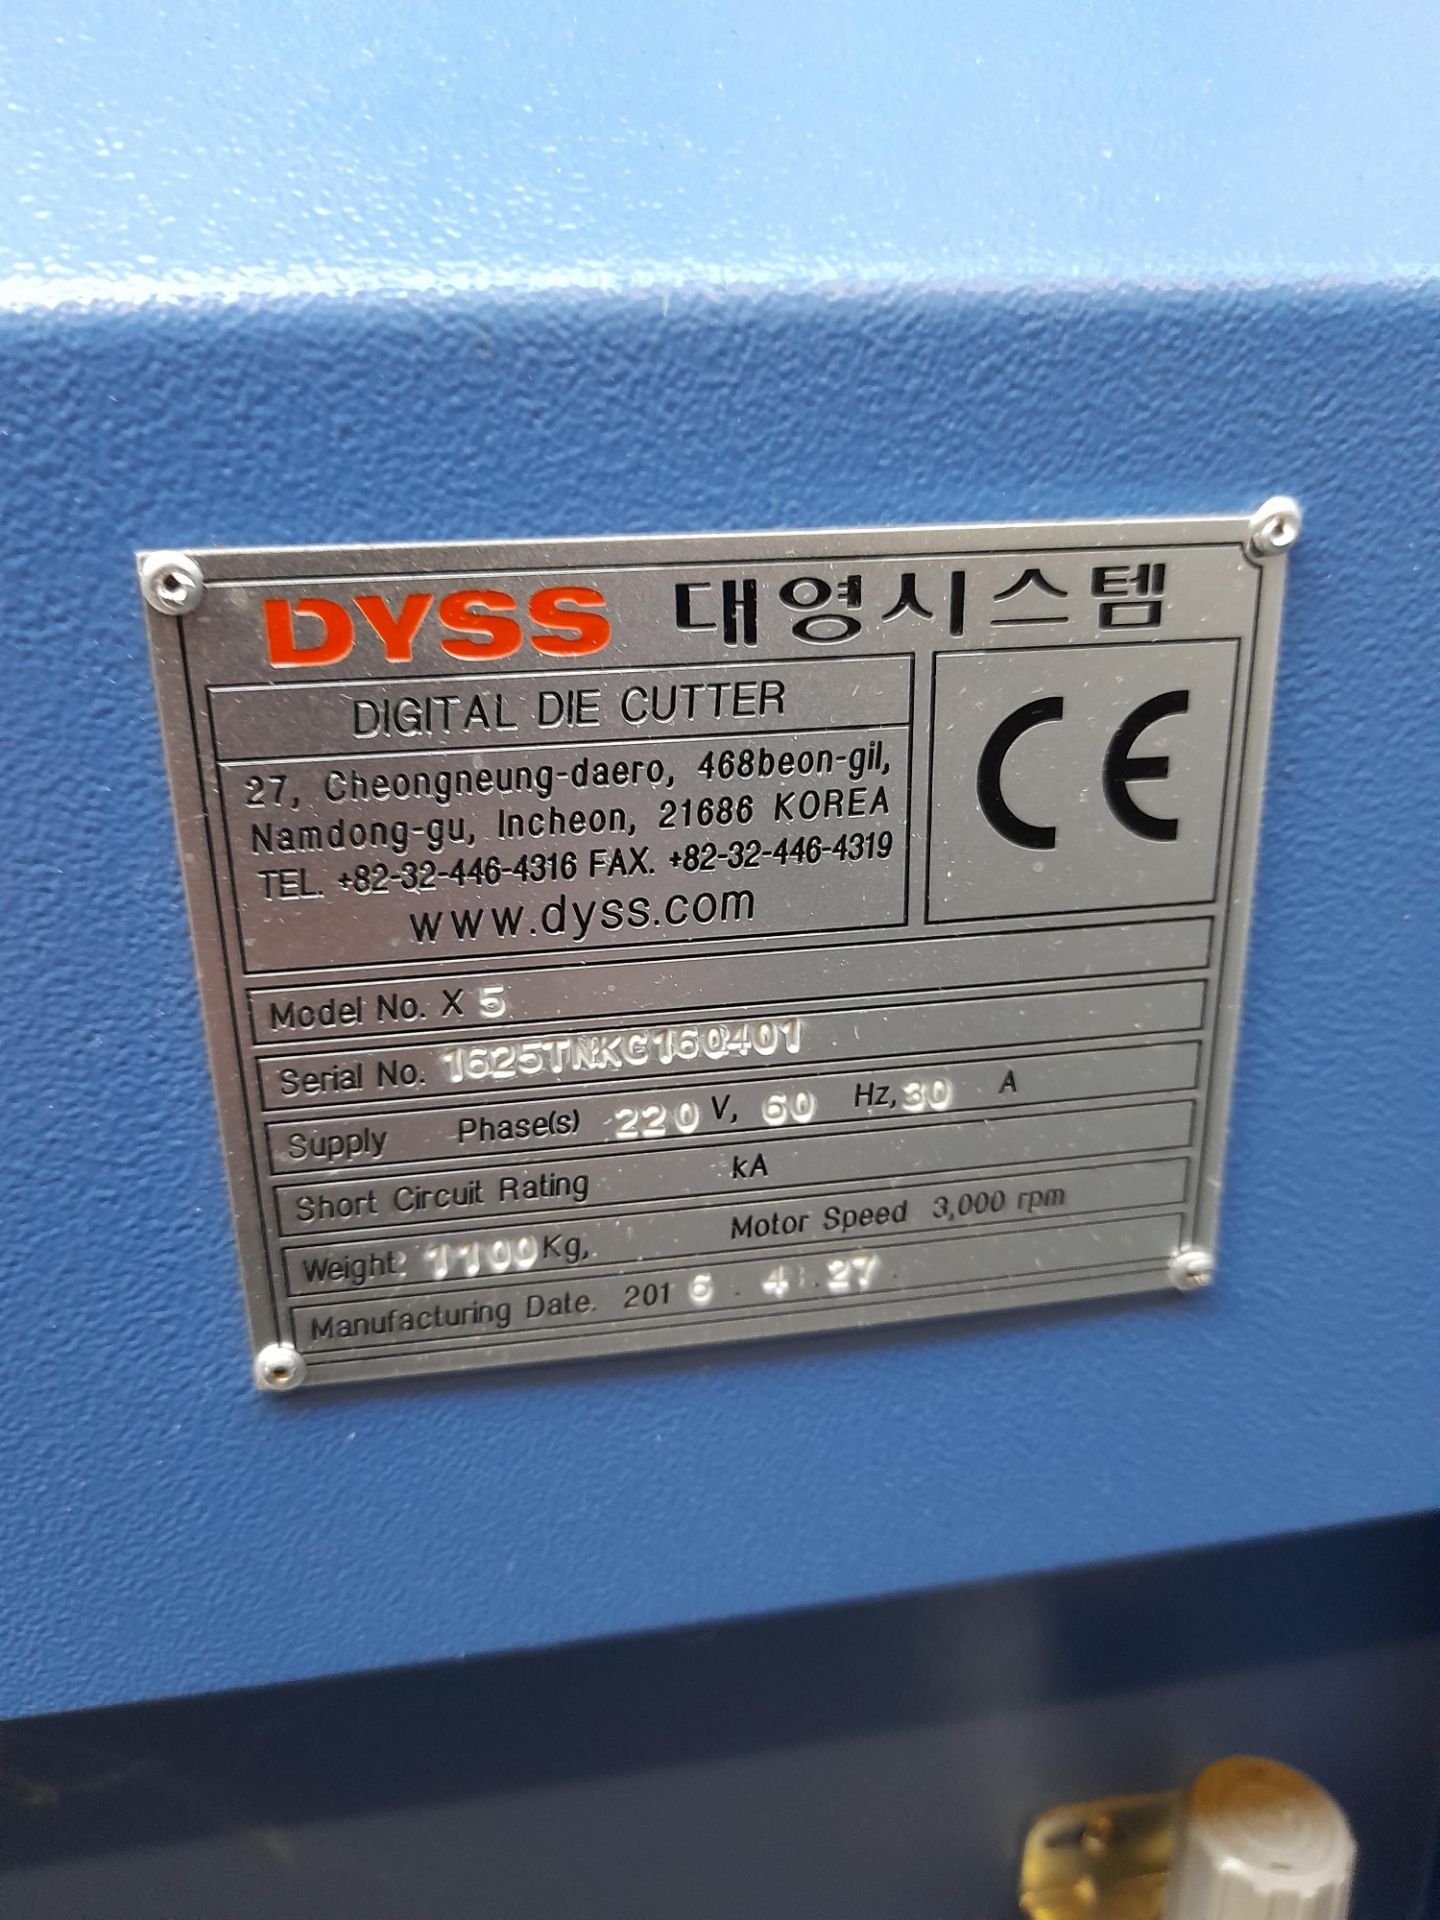 Dyss X5 Digital Die Cutter, serial number 1625TNKC160401, manufactured April 2016, with controls and - Image 6 of 11